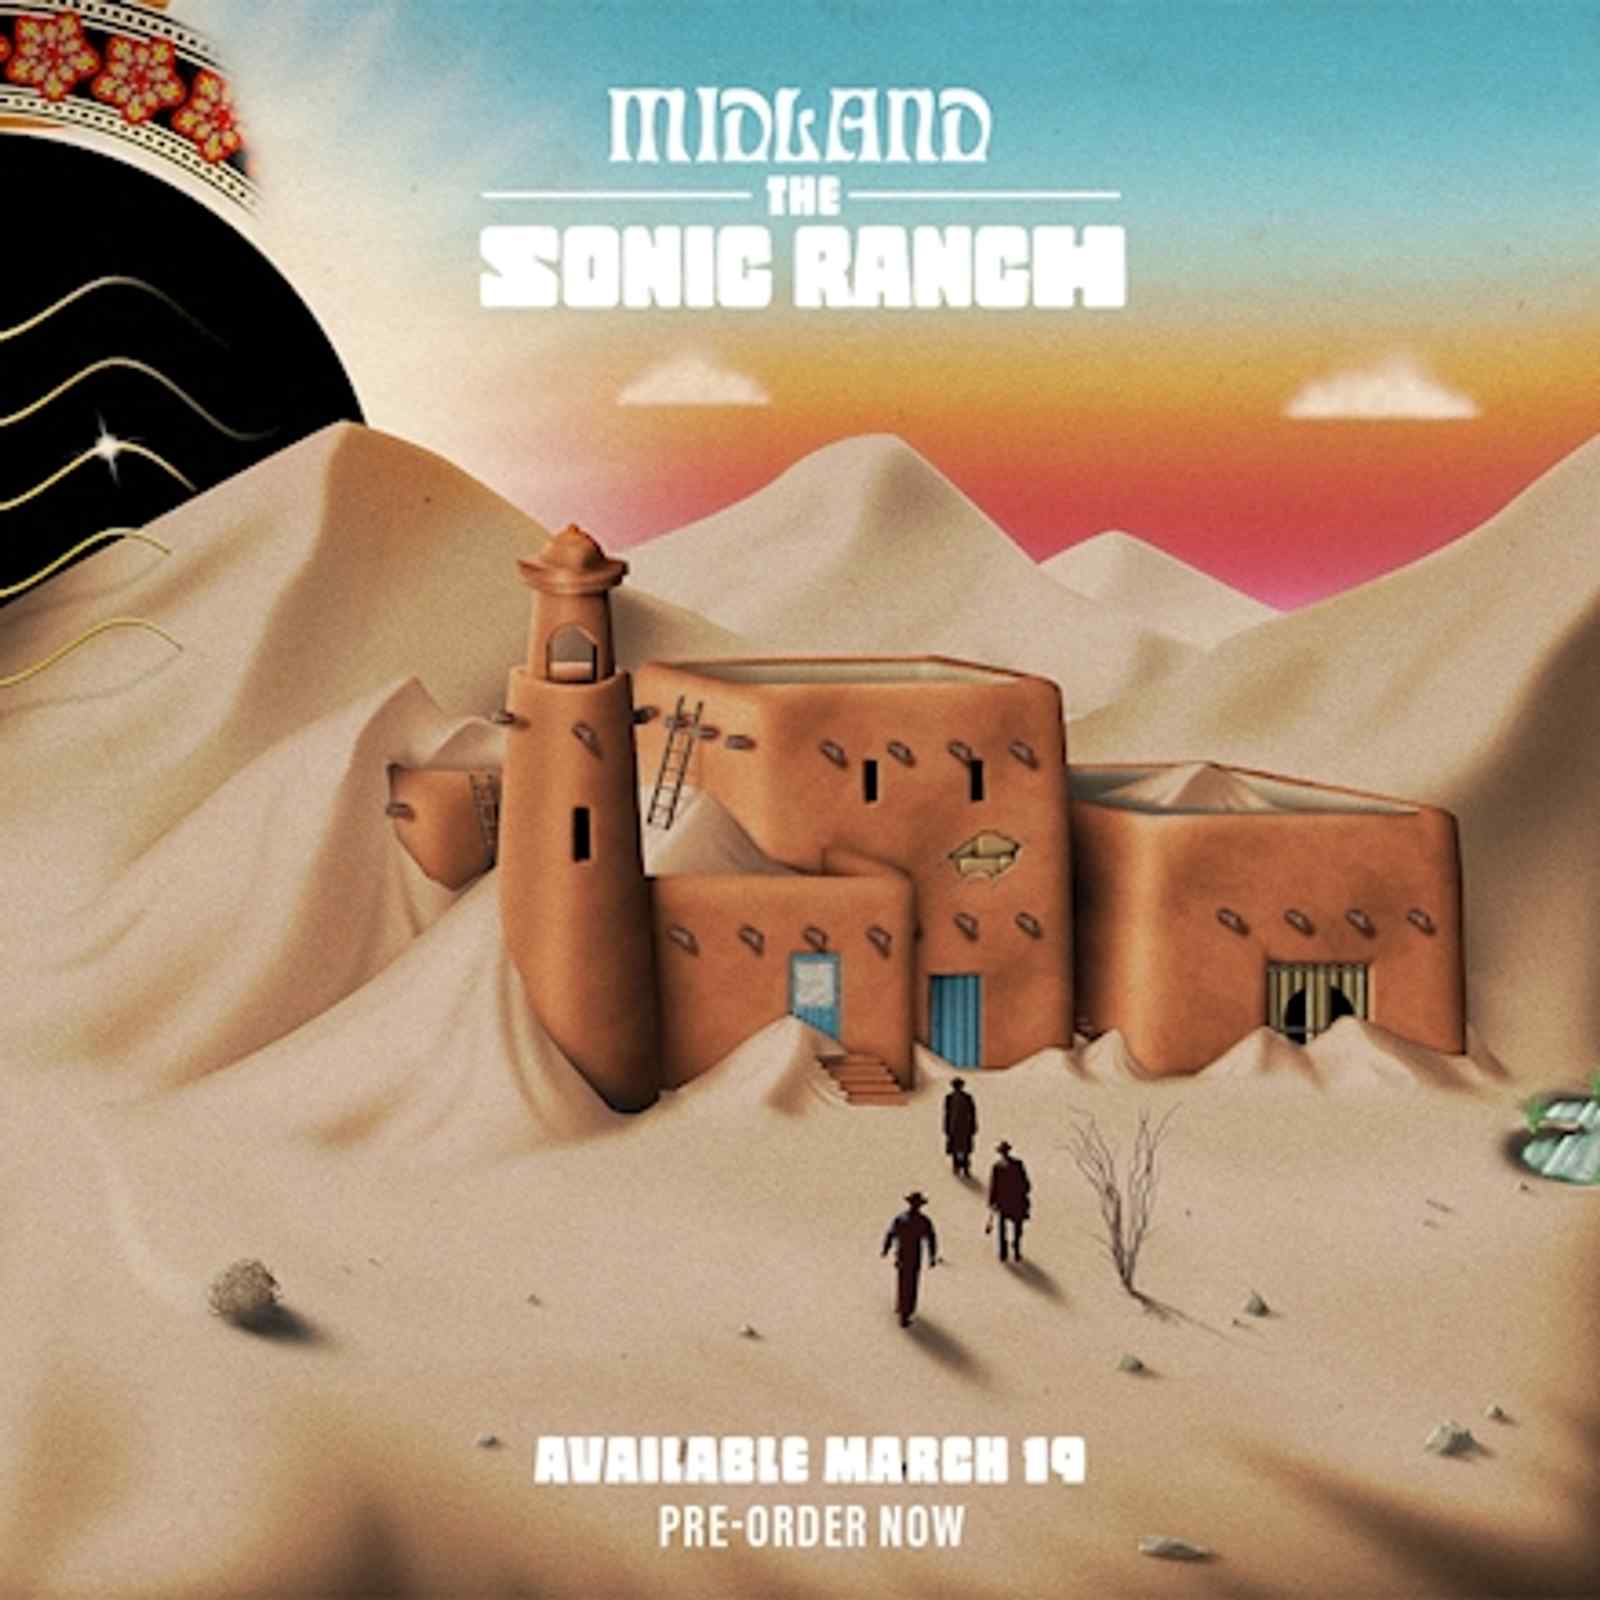 The Sonic Ranch by Midland